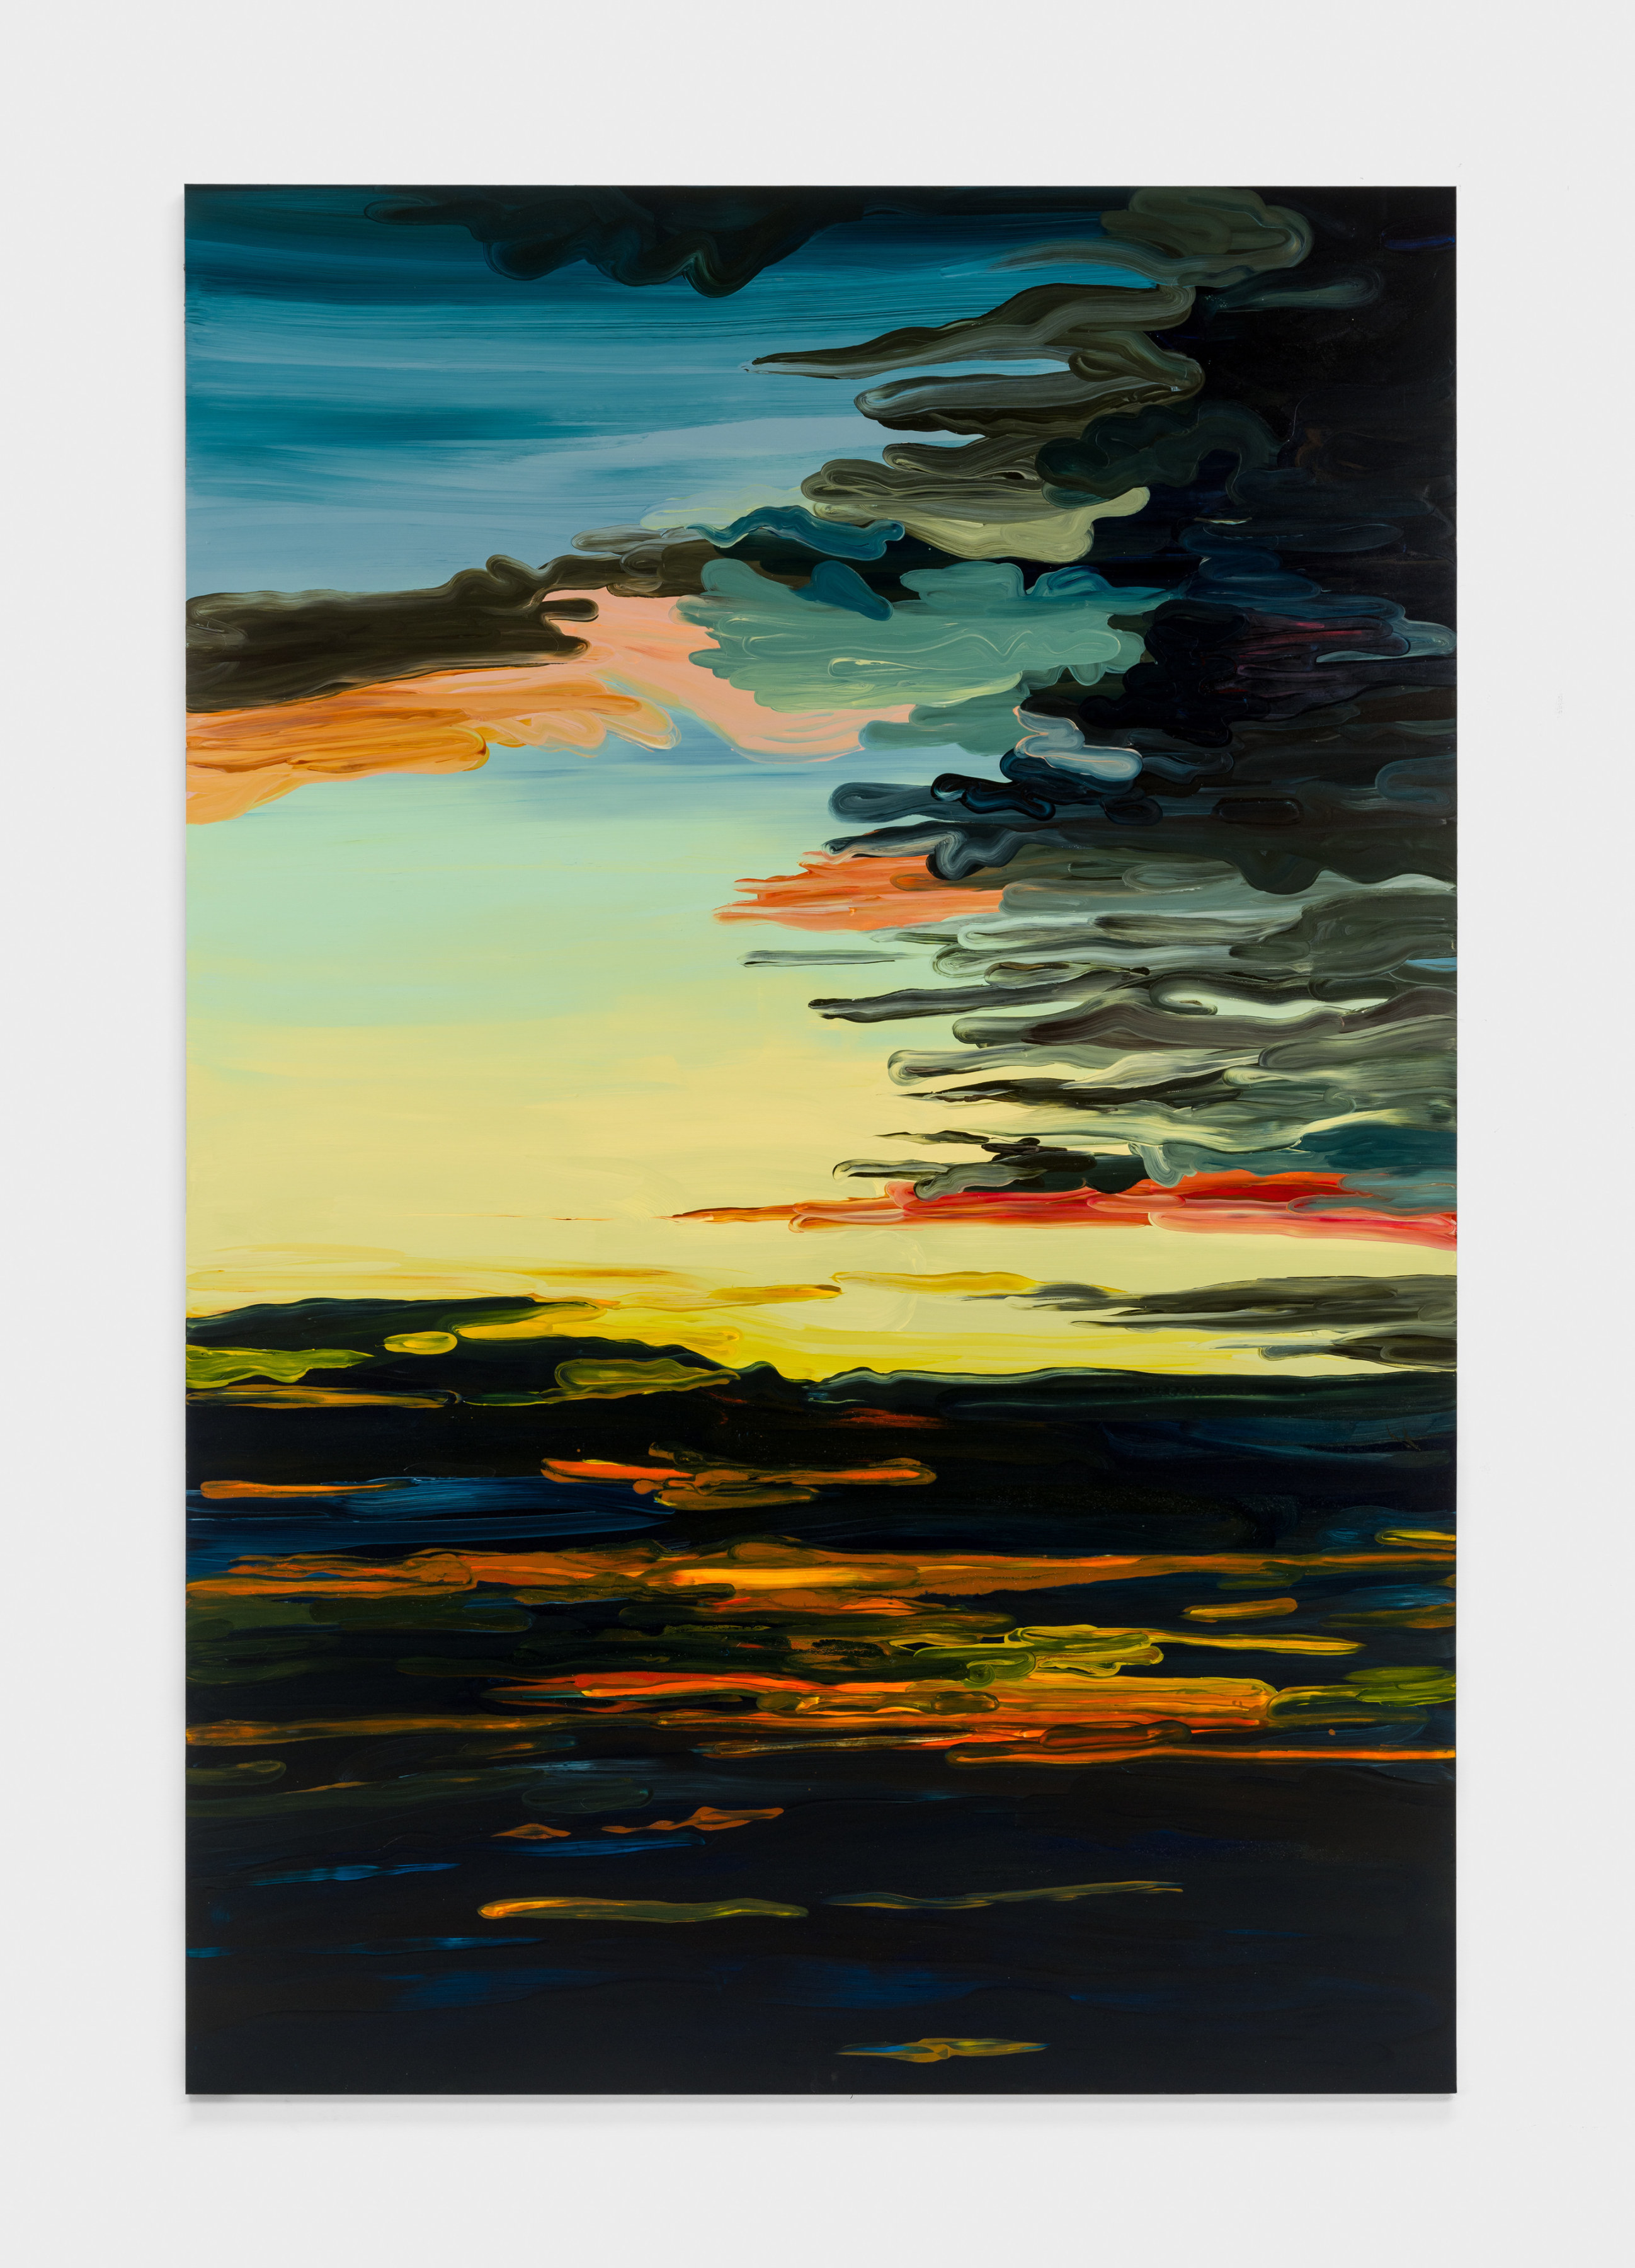 A depiction of a cloudy sunset sky with hues of pink, blue, yellow, and green. 